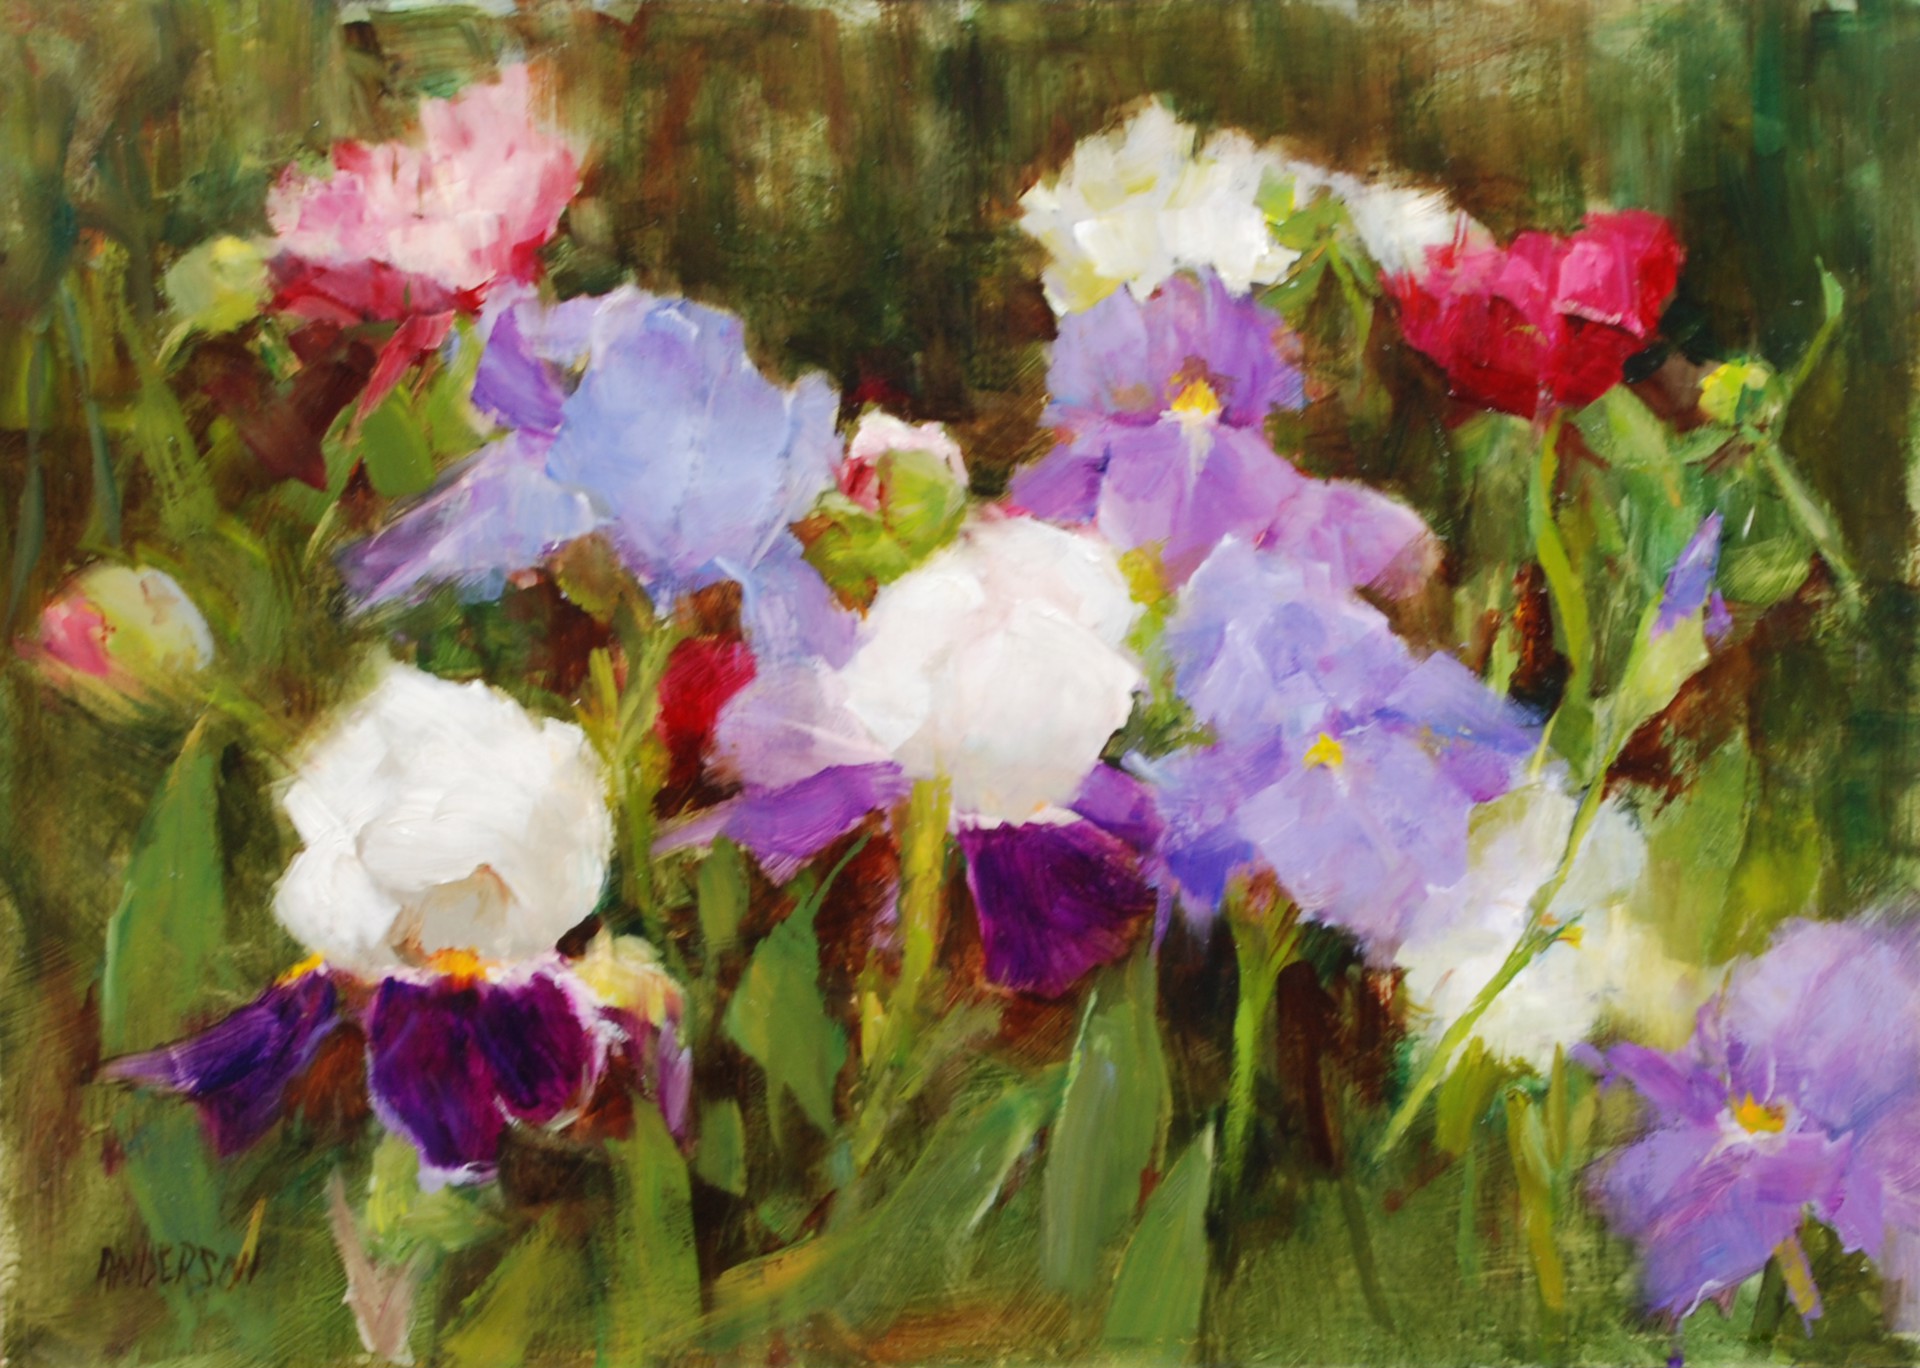 Blue Iris with Peonies by Kathy Anderson